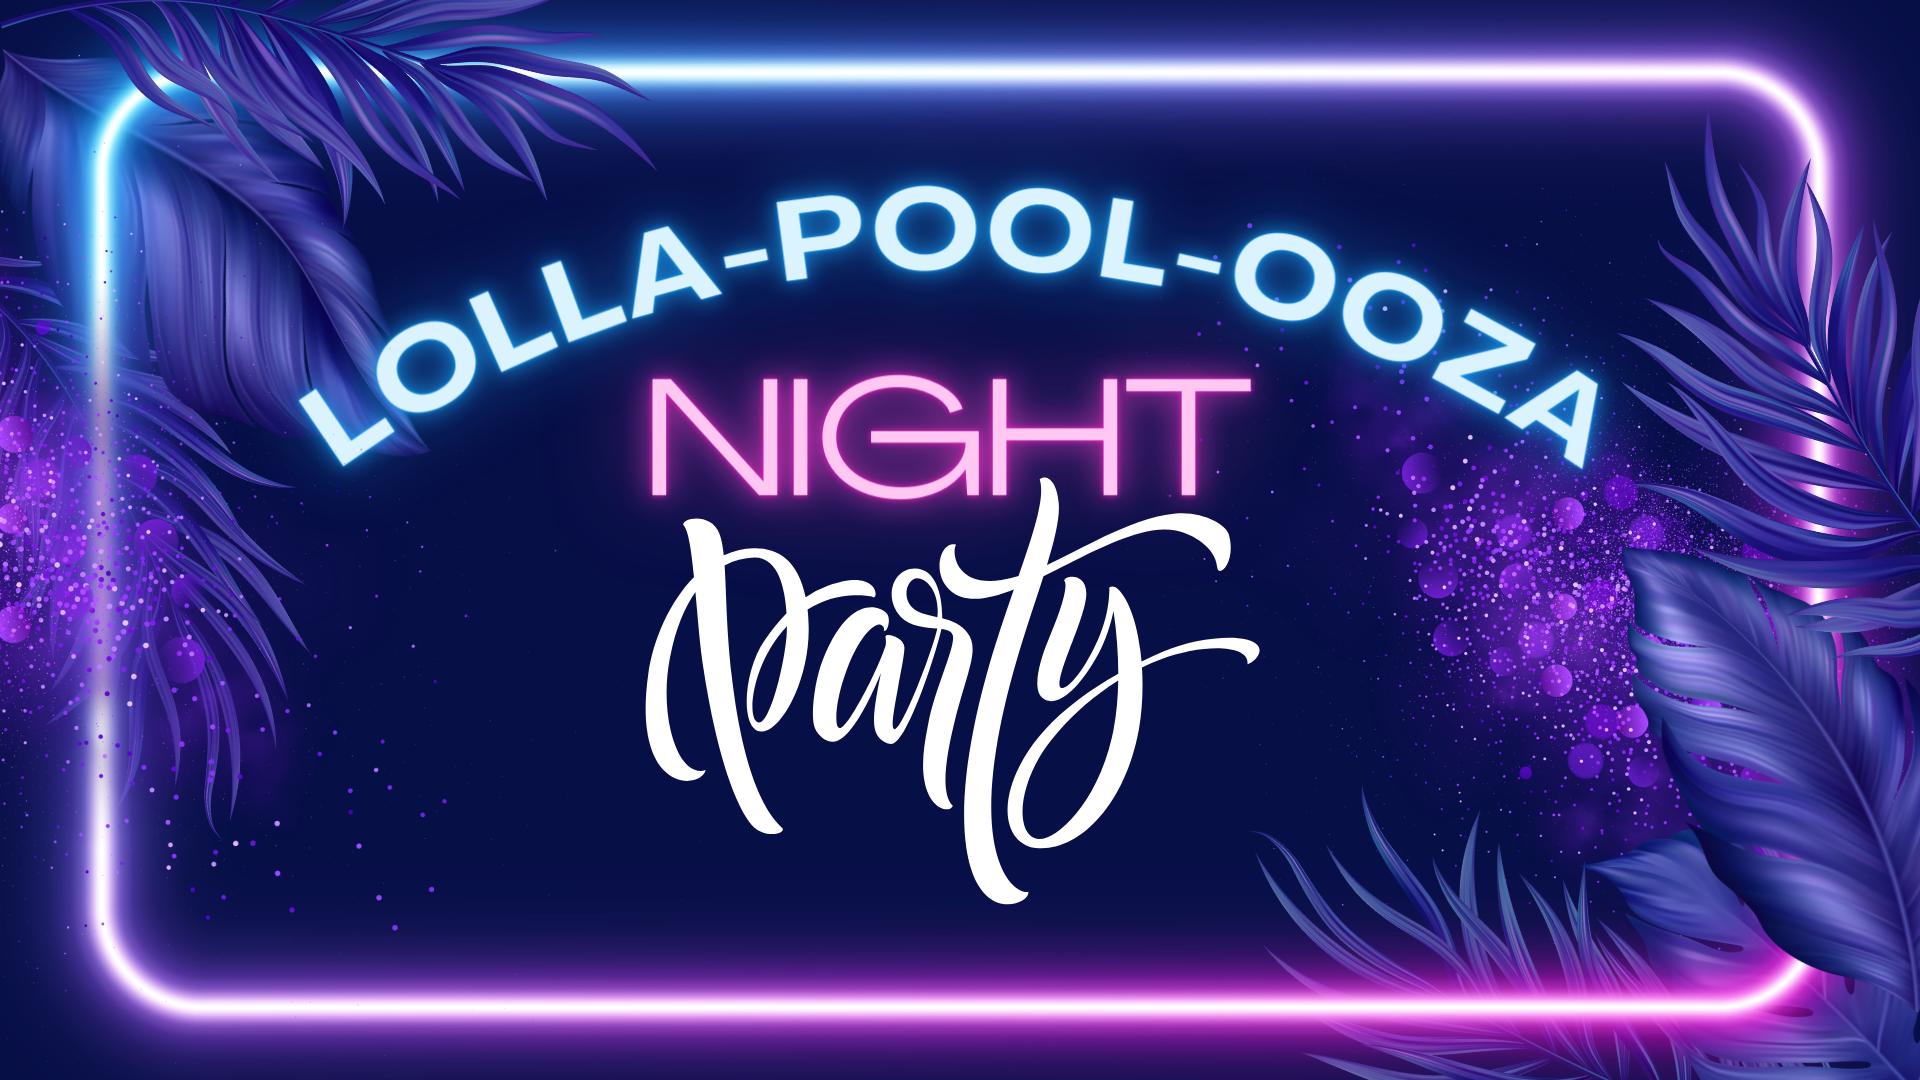 Lolla-Pool-Ooza Night Party